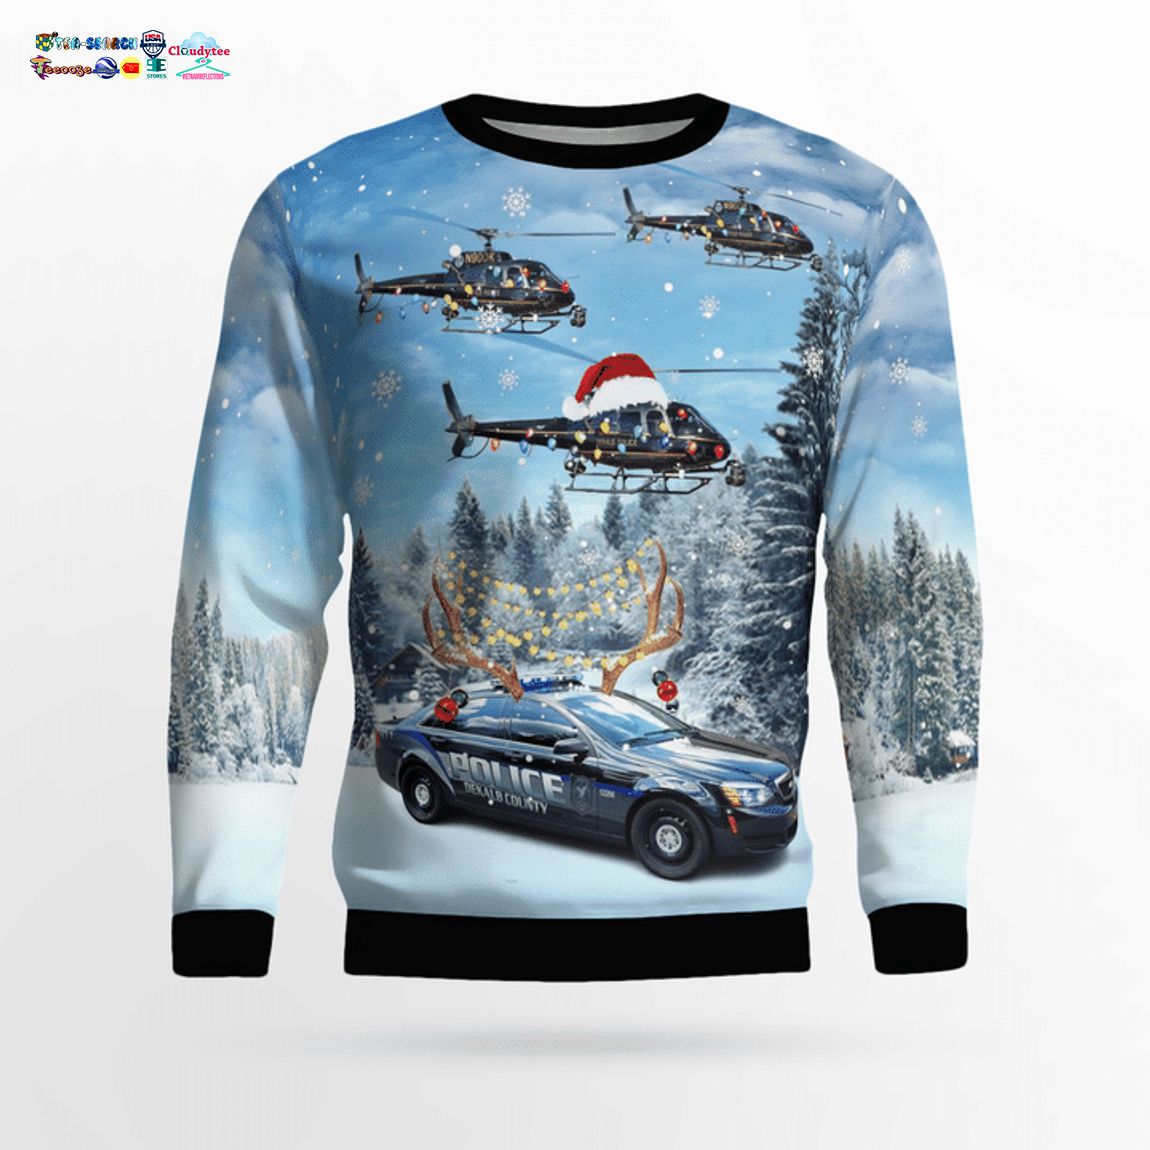 DeKalb County Police Department Eurocopter AS-350 BS A-Star Helicopter And Car 3D Christmas Sweater